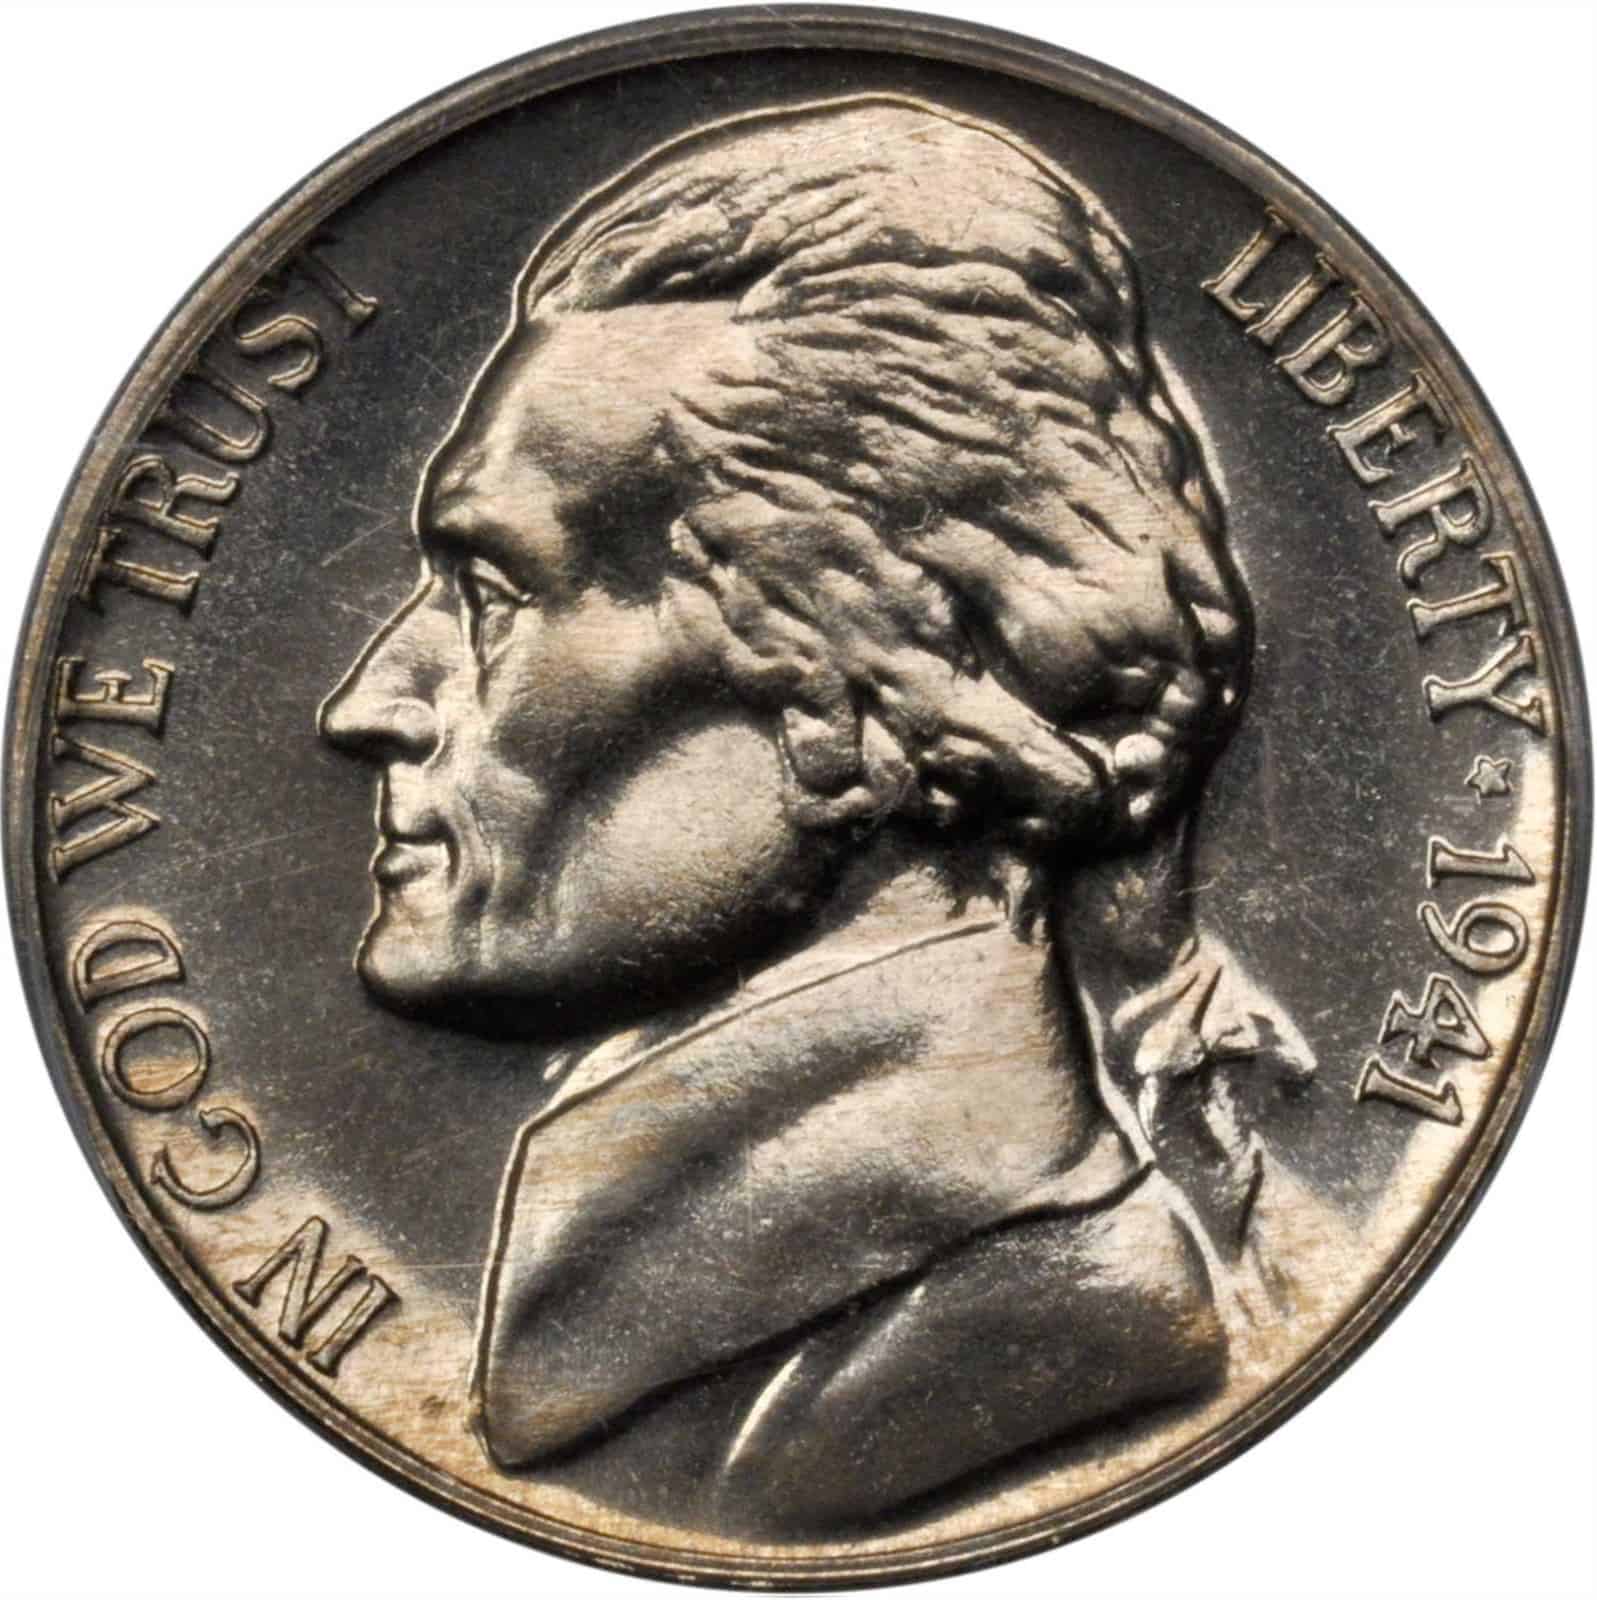 The obverse of the 1941 Jefferson nickel